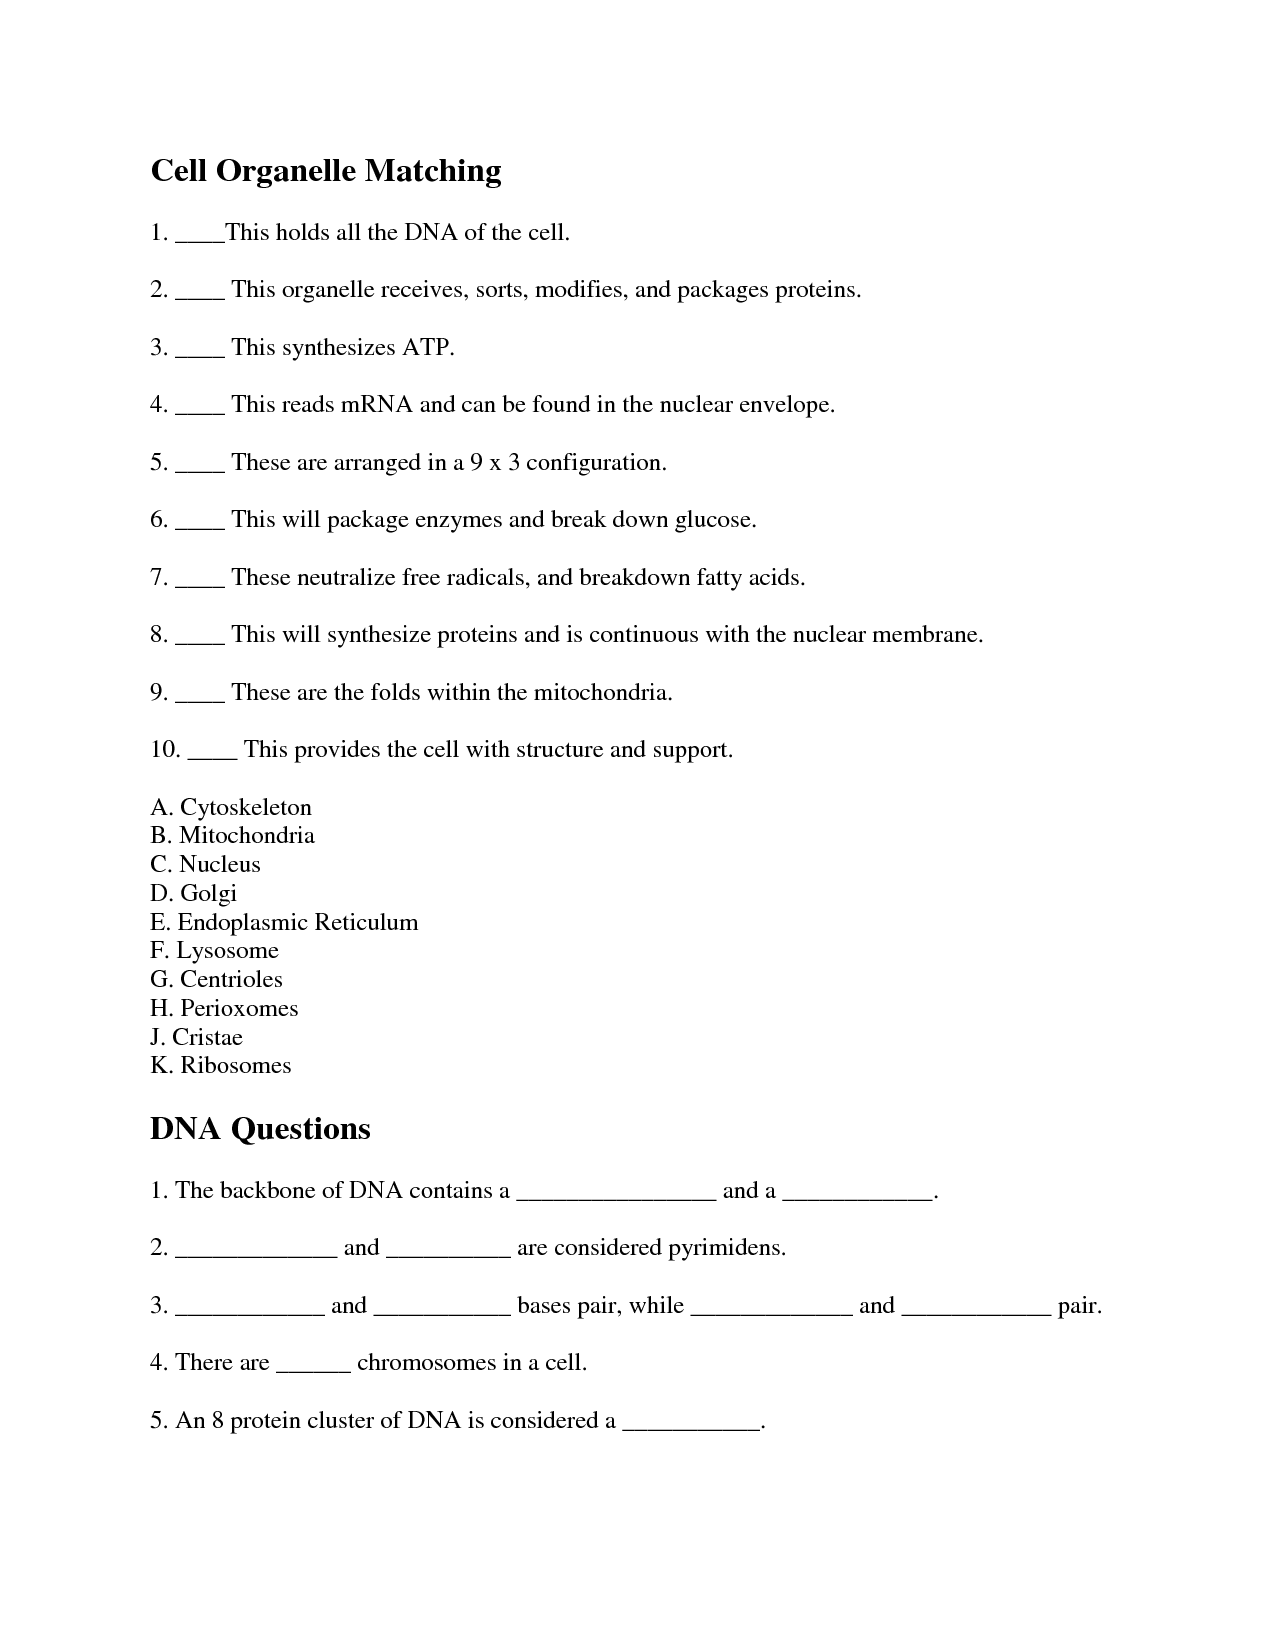 17-best-images-of-biology-cell-organelles-worksheet-cell-organelles-worksheet-answer-key-cell